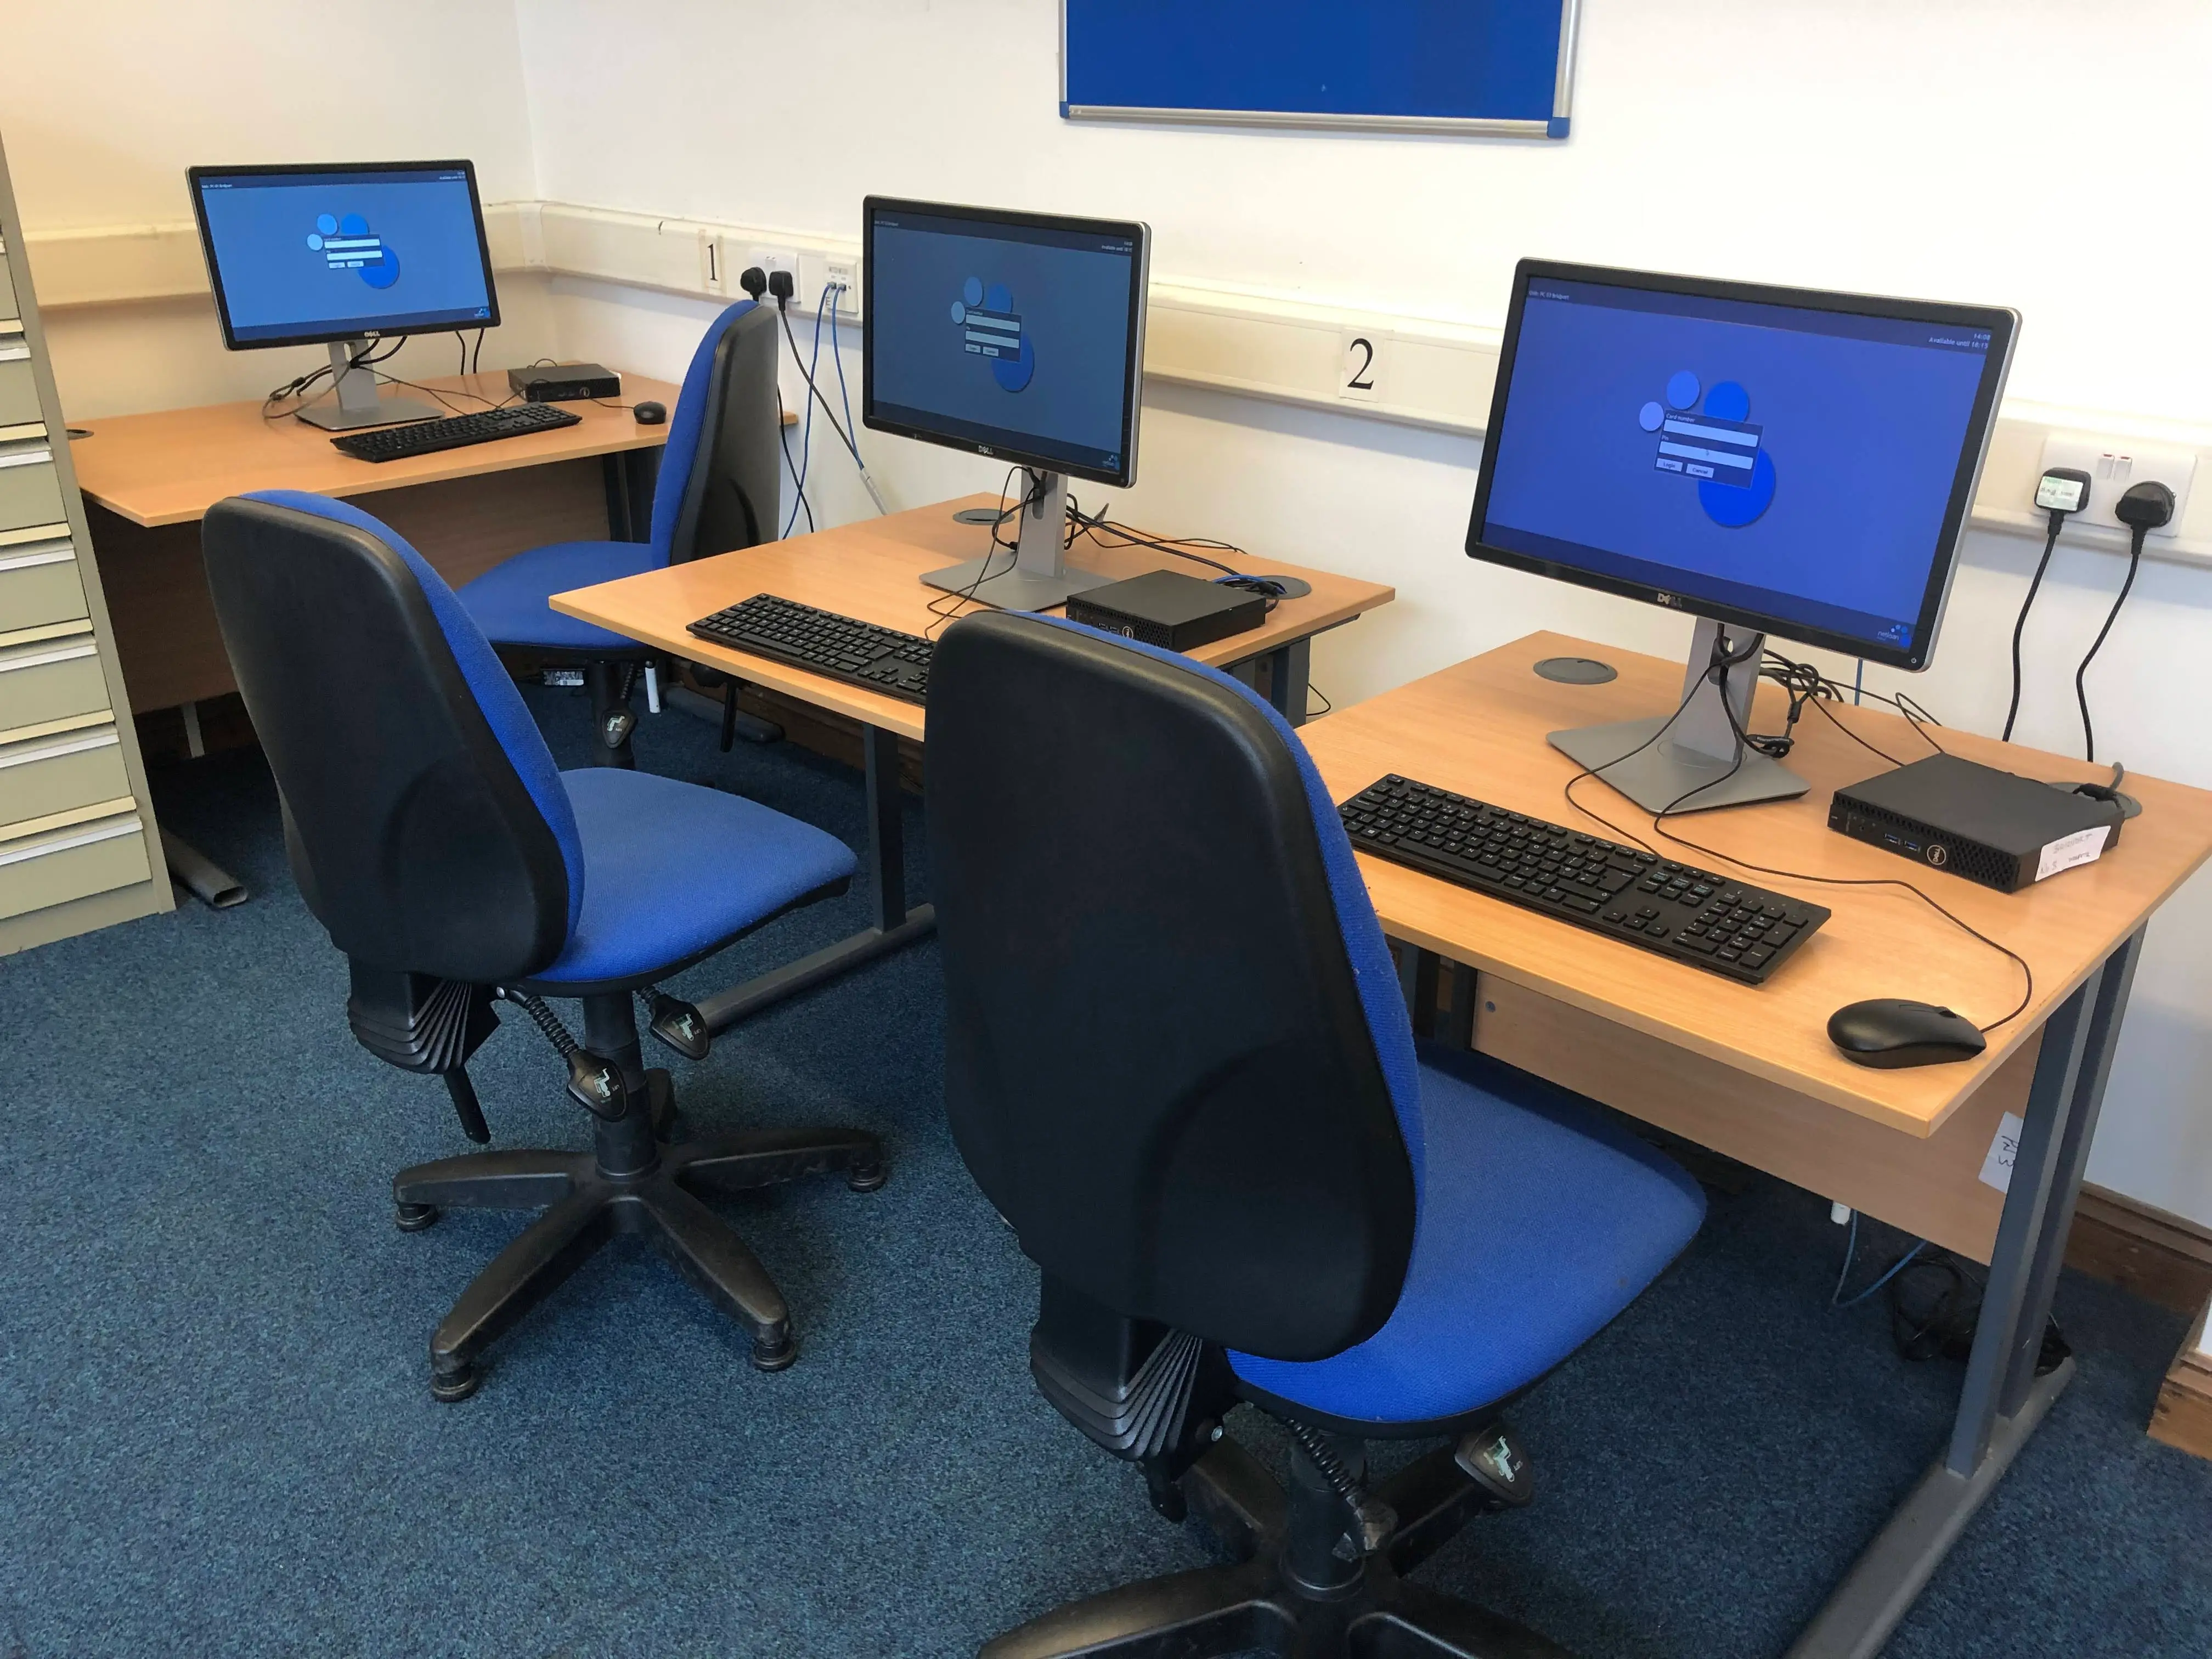 This is a picture of three desks with computer screens and keyboards on each.  There is a blue chair in front of each desk.